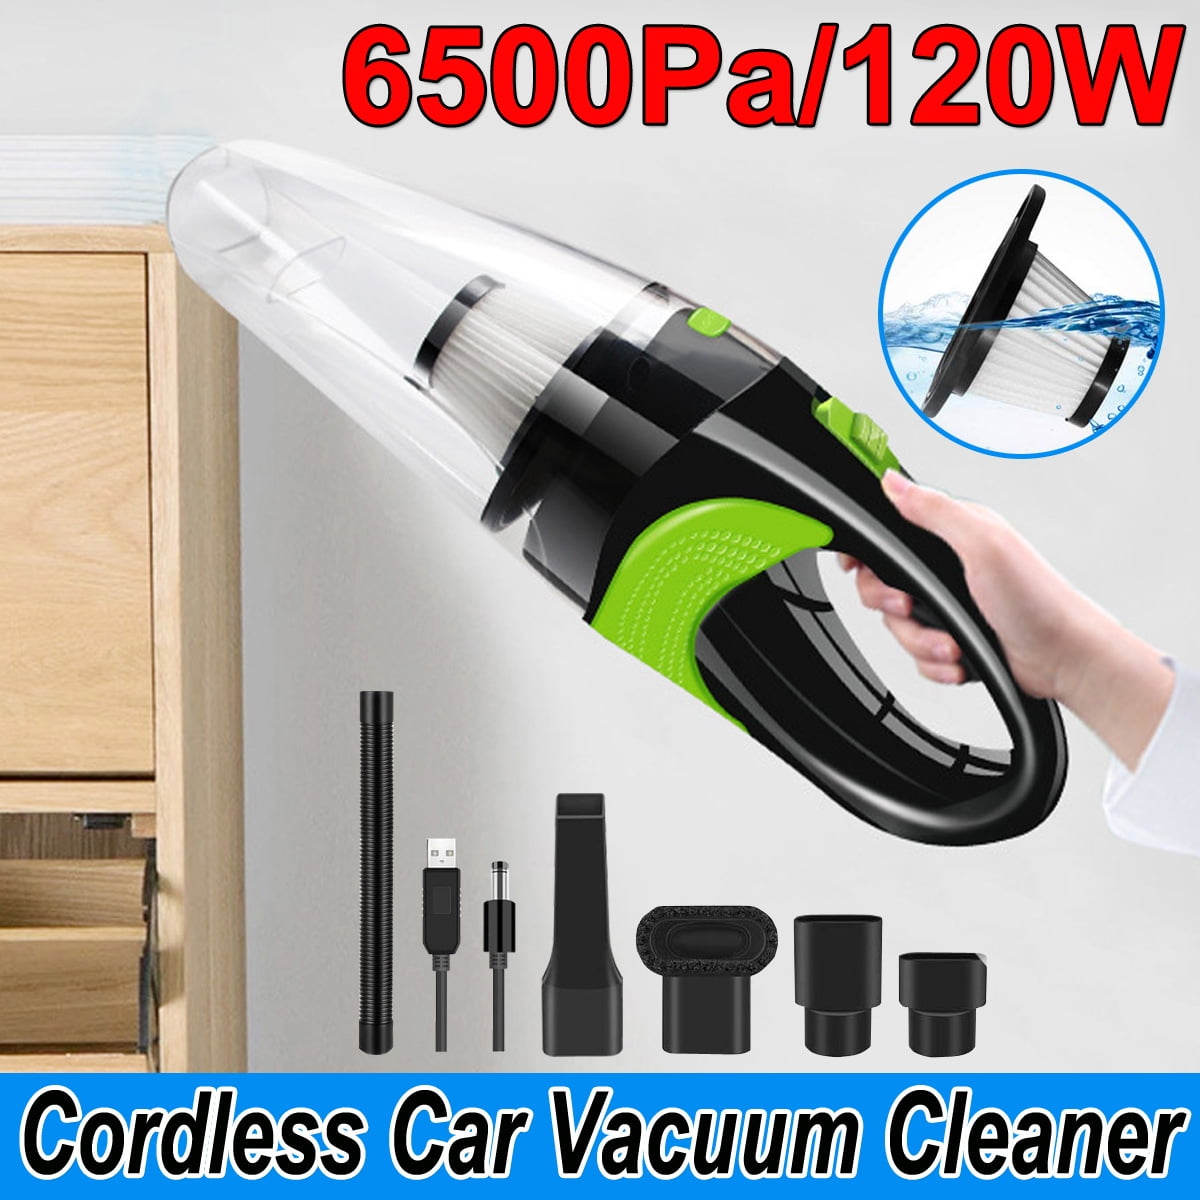 120W Cordless/Cord Hand Held Vacuum Cleaner Small Portable Car Auto Home D